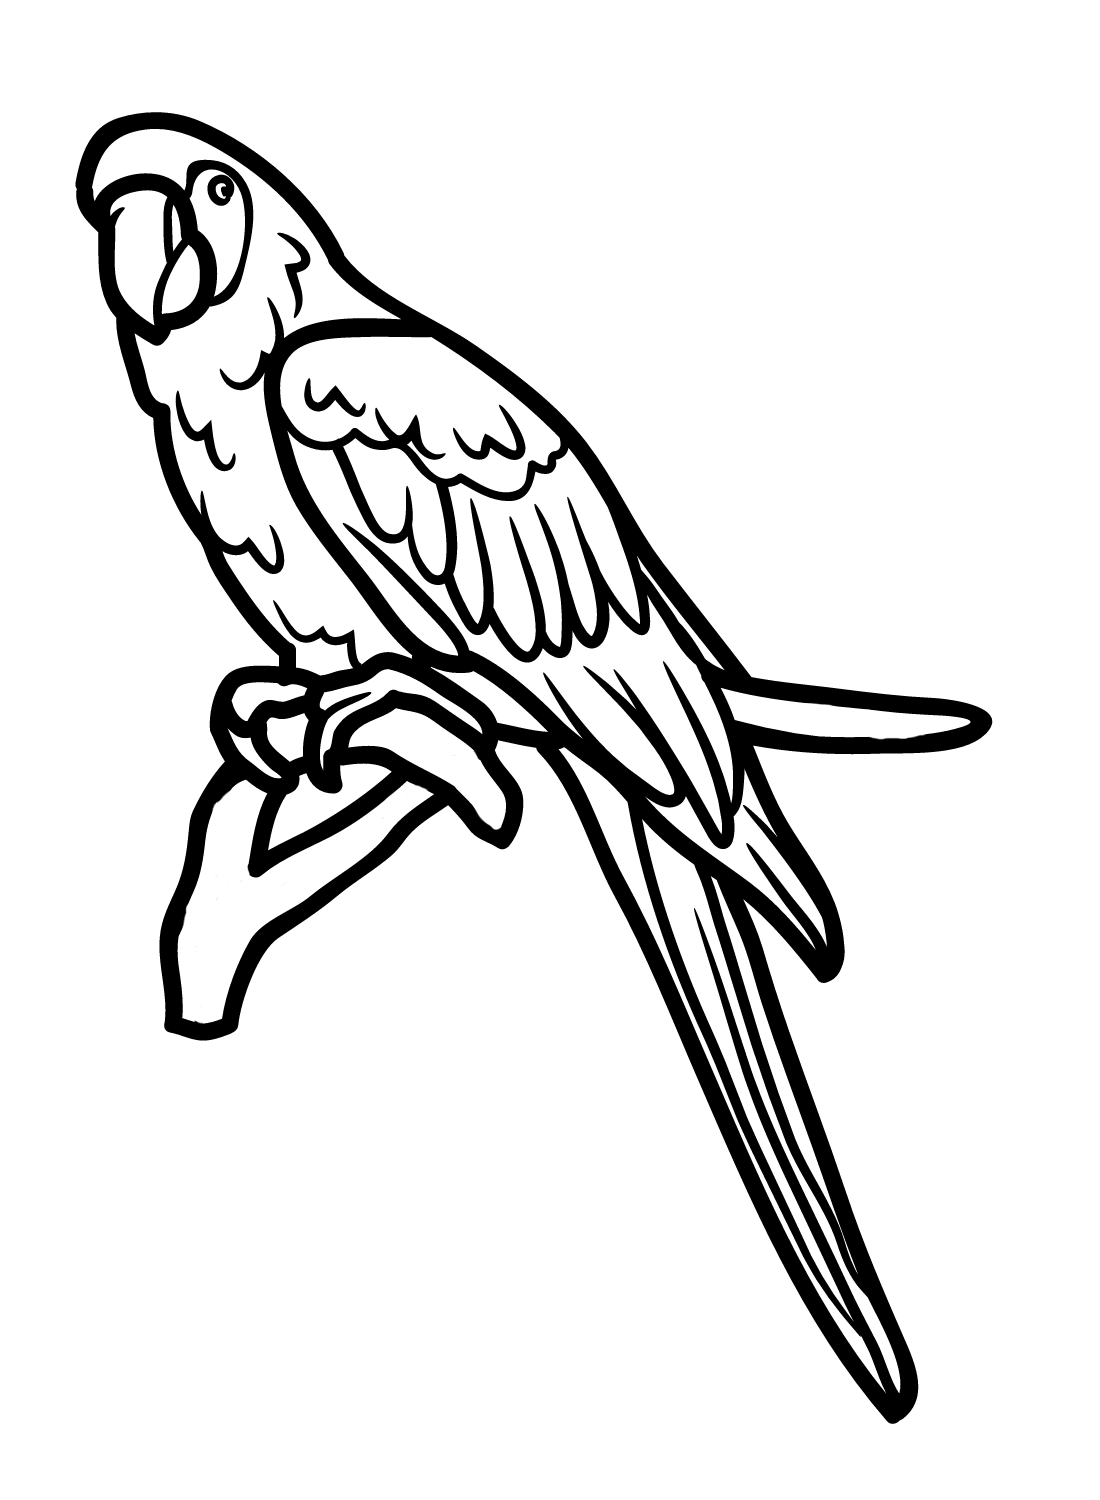 A Macaw from Macaw